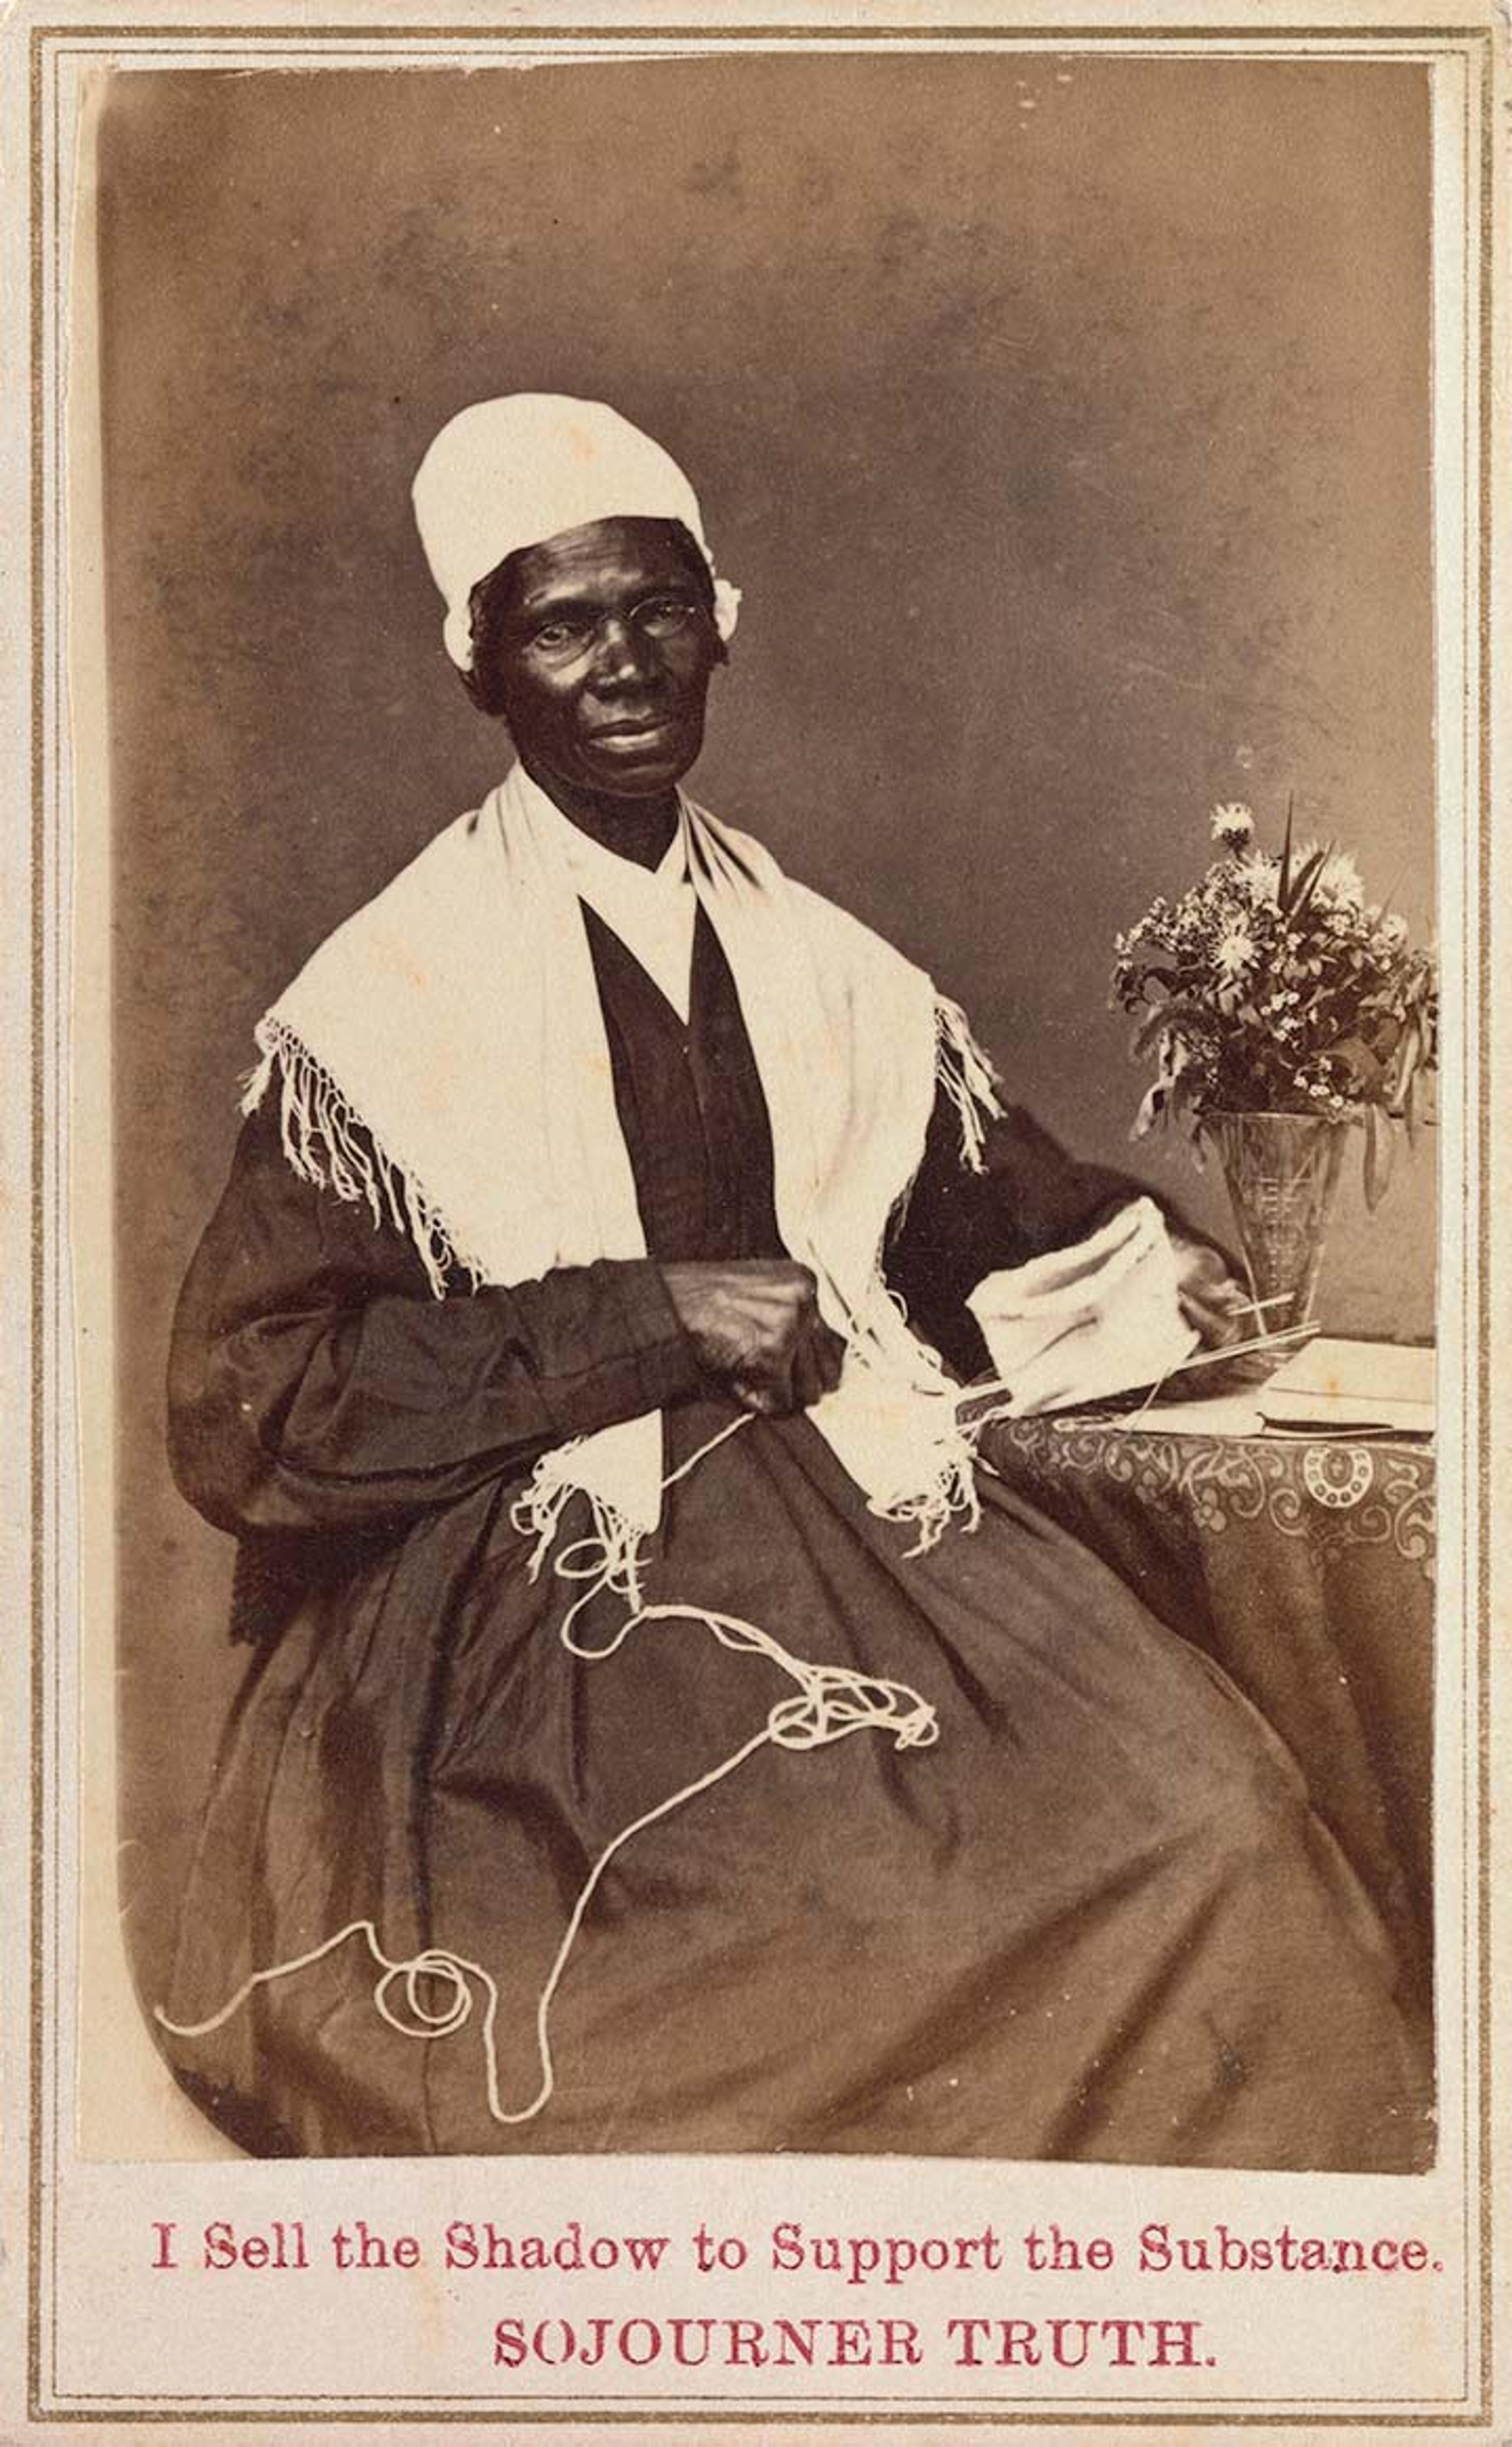 Sojourner Truth stops knitting to look at the camera. She sits upright in a chair resting her left arm on a table. On the table is also a vase of flowers.